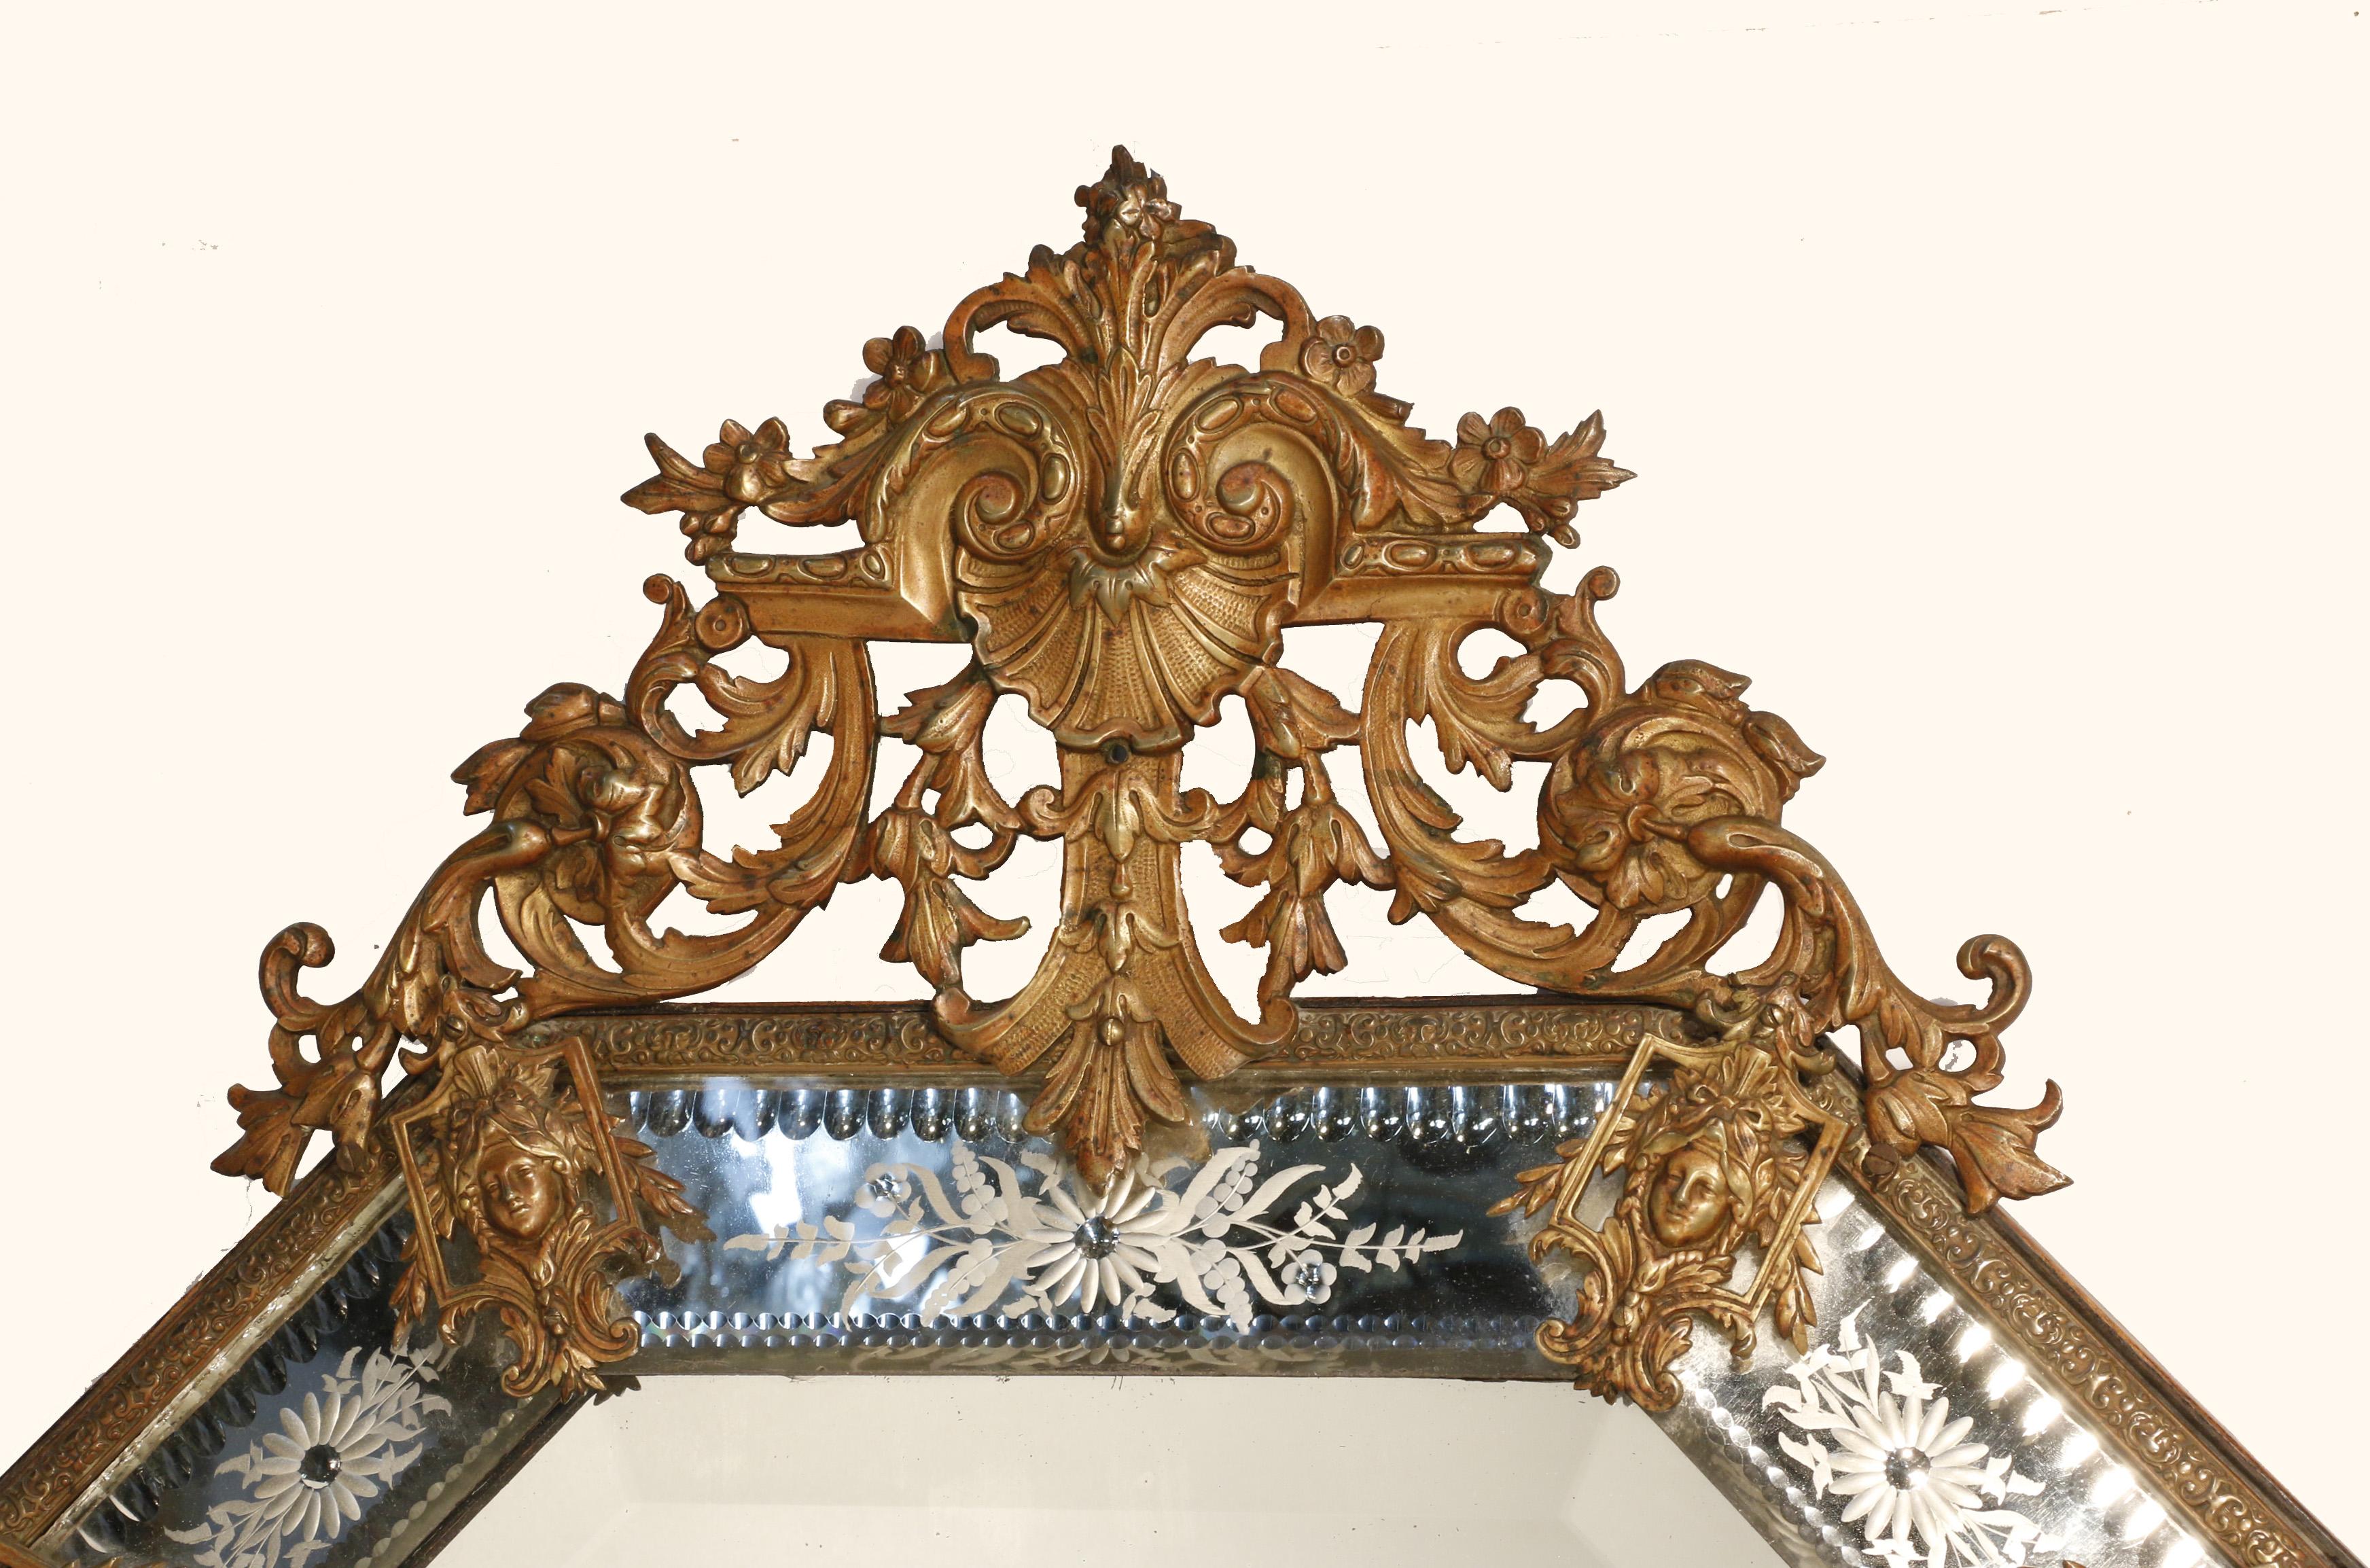 This mirror has a bevelled plate surrounded by verre eglomisee angled panels so there is much sparkle and reflection.
The elaborate pierced bronze crest is centred by a stylized shell with acanthus; a motif echoed at the base. 
A stylish touch is